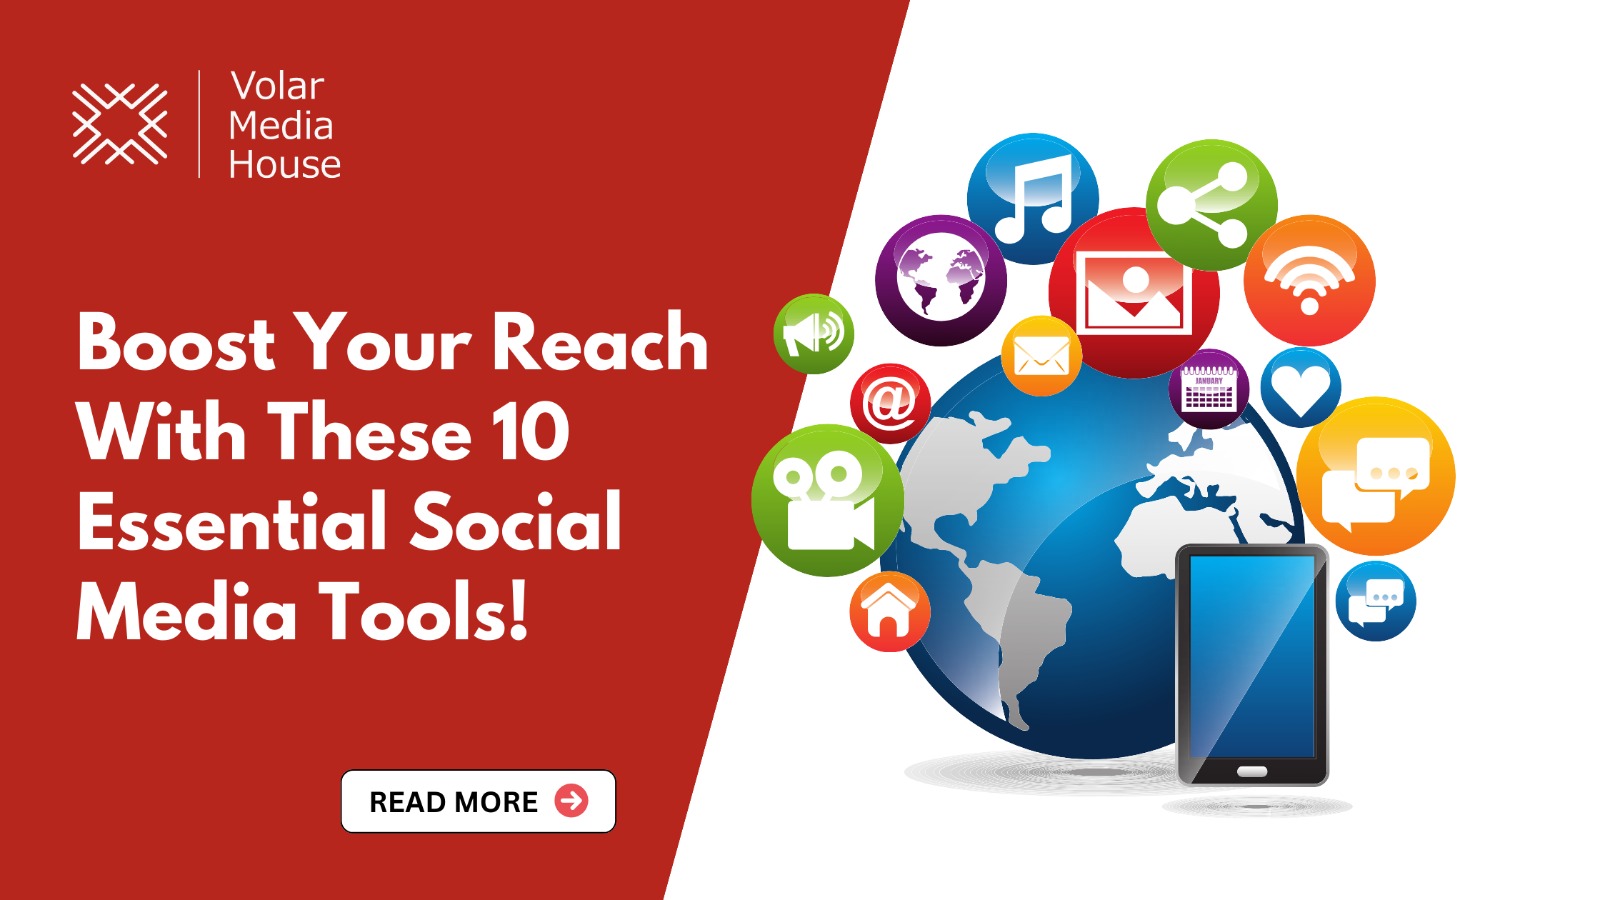 Boost Your Reach With These 10 Essential Social Media Tools!